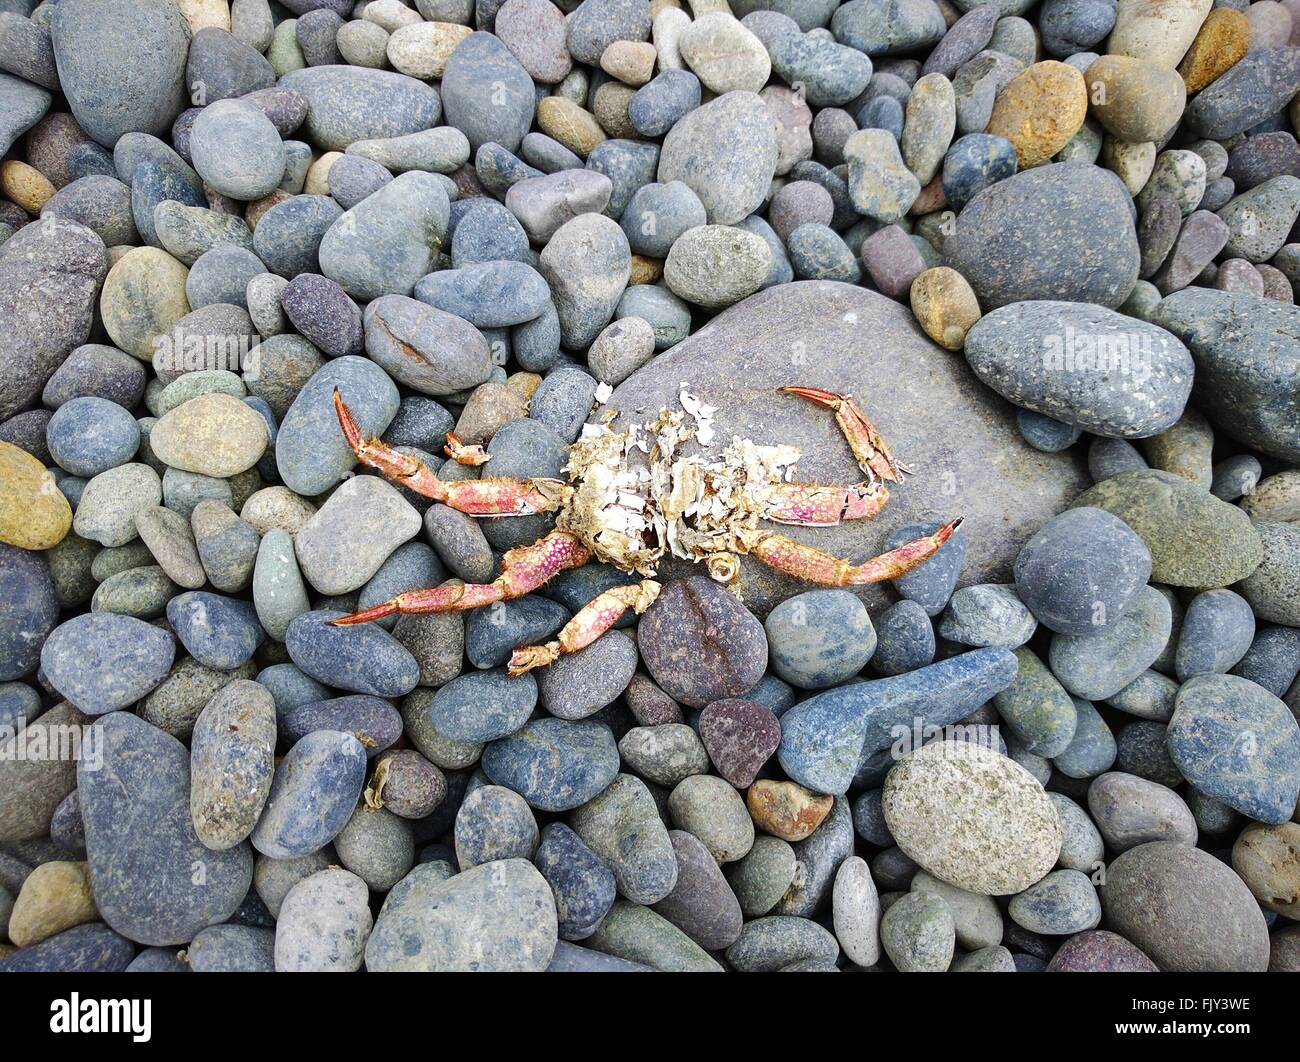 Directly Above Shot Of Dead Crab On Pebbles At Beach Stock Photo